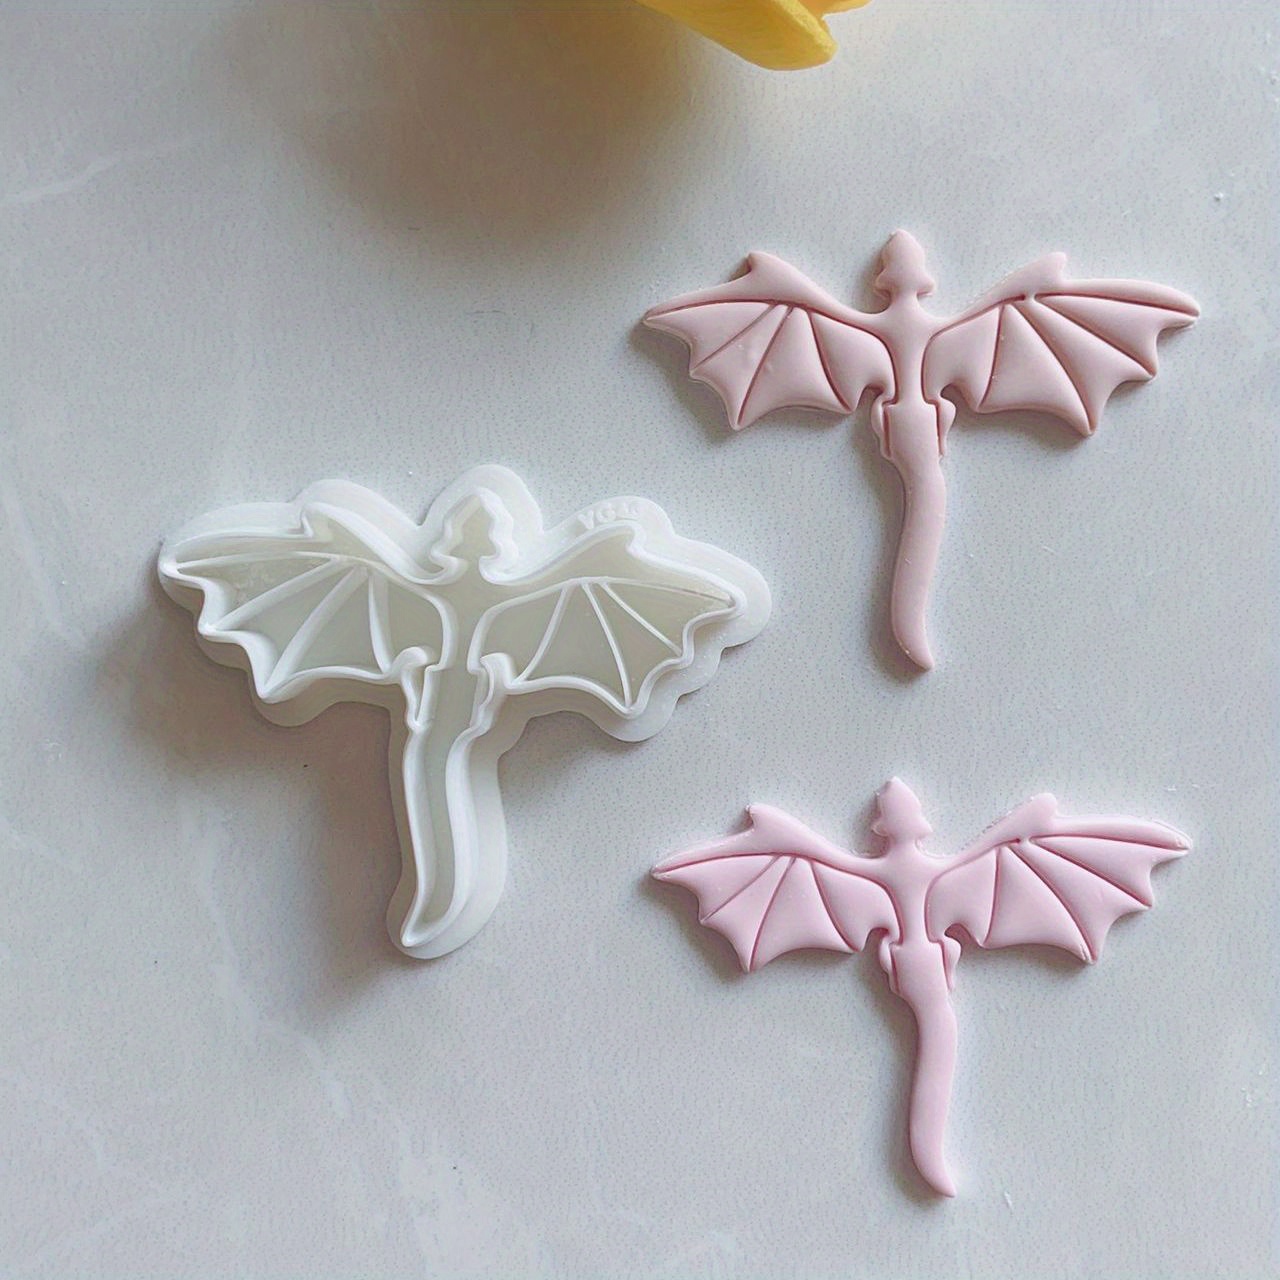 Maijaibao Flying Dragon Wing Silicone Molds Earring Resin Molds